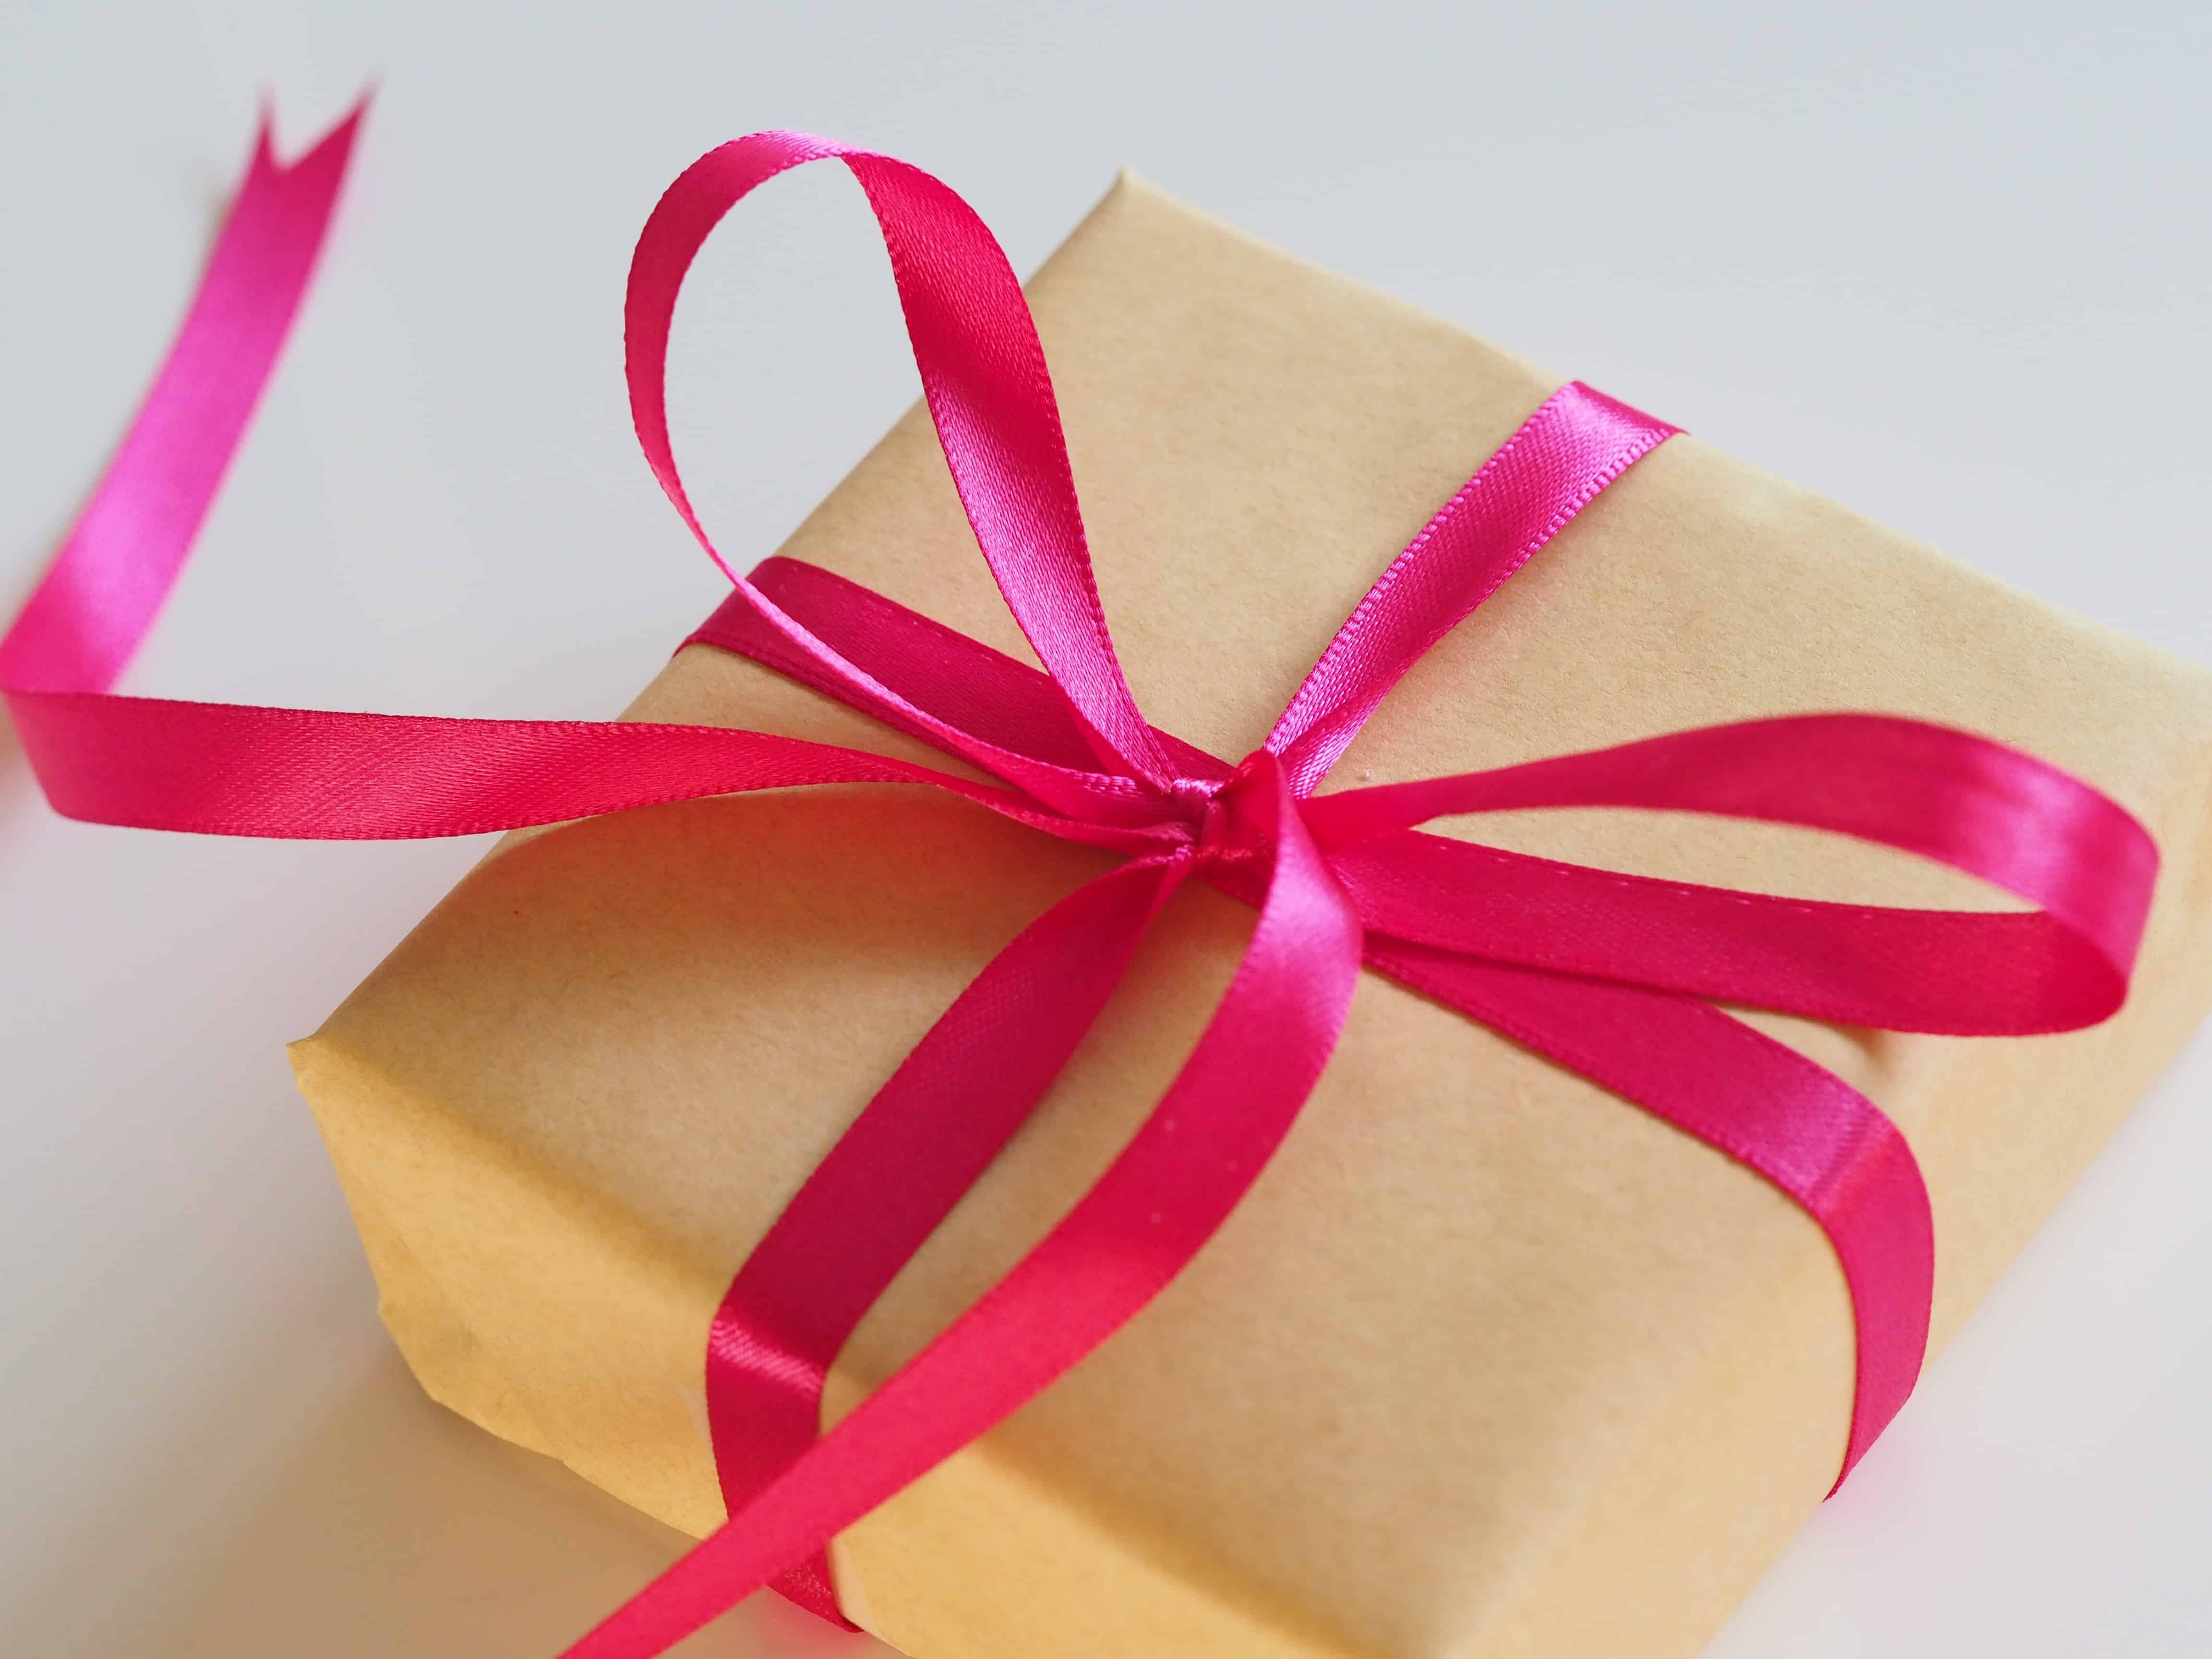 Pink ribbon tied in a bow on a present